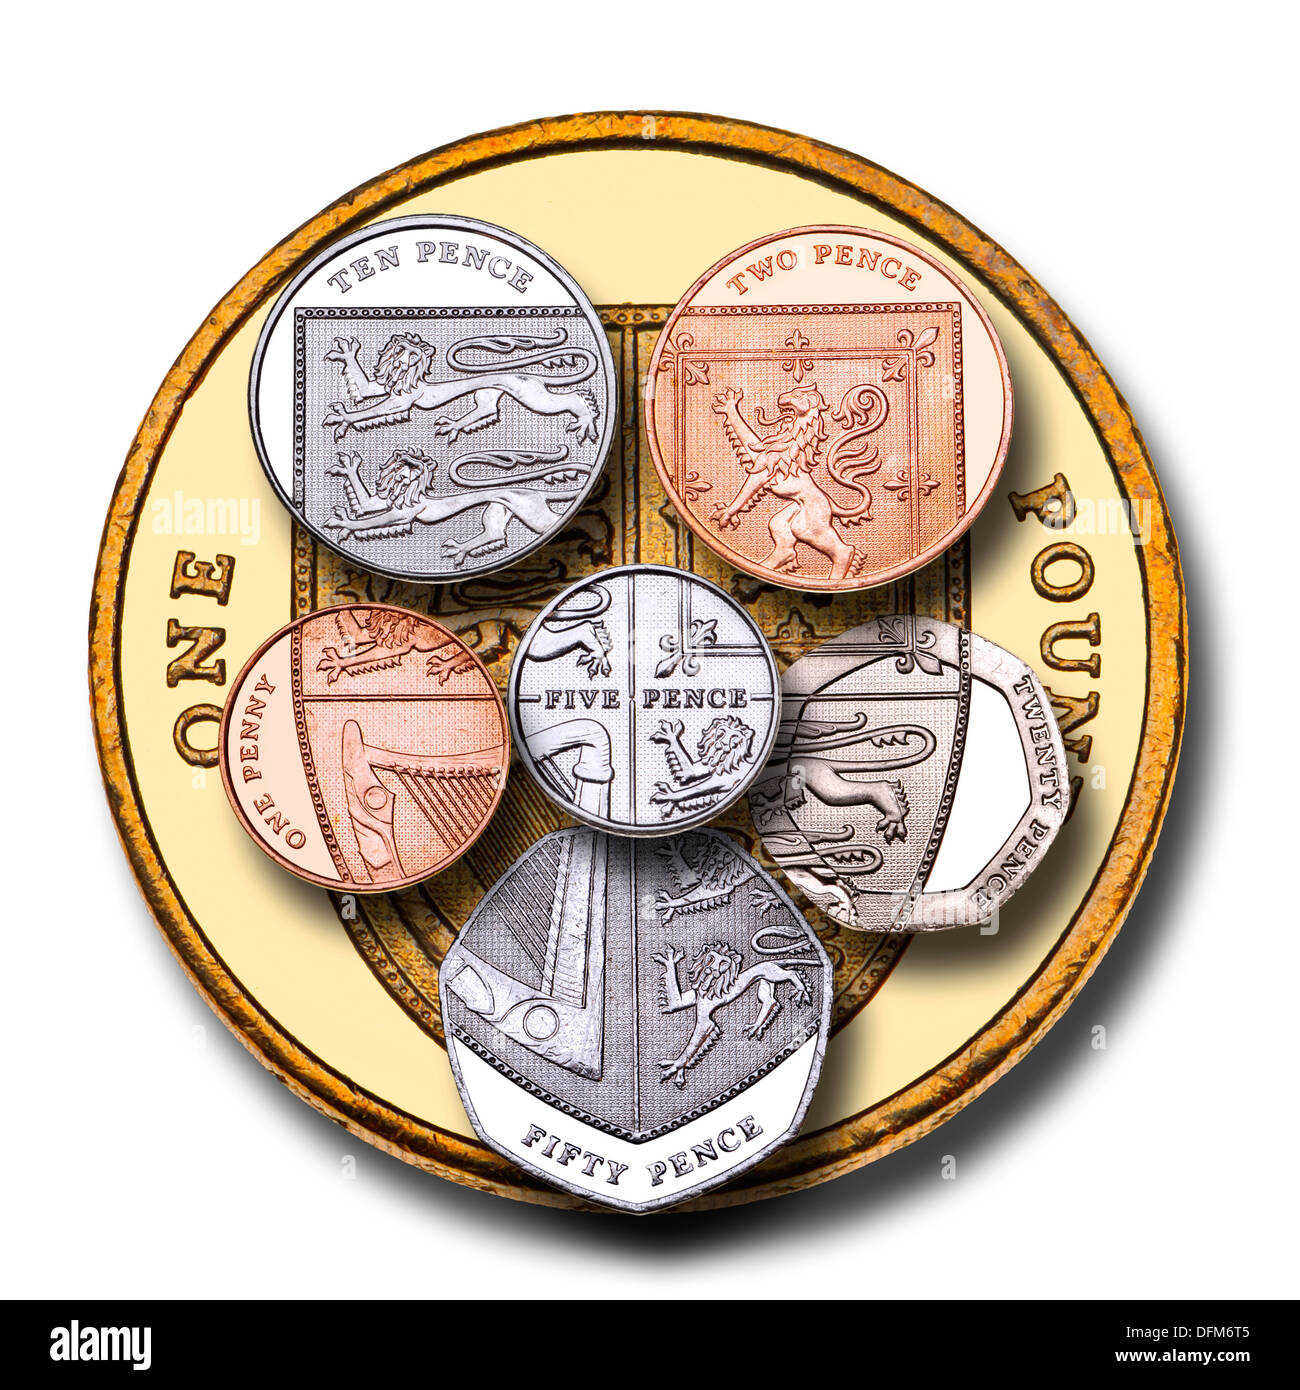 British coinage. All coins, put together to form the shield found on the revers of the pound coin. Stock Photo